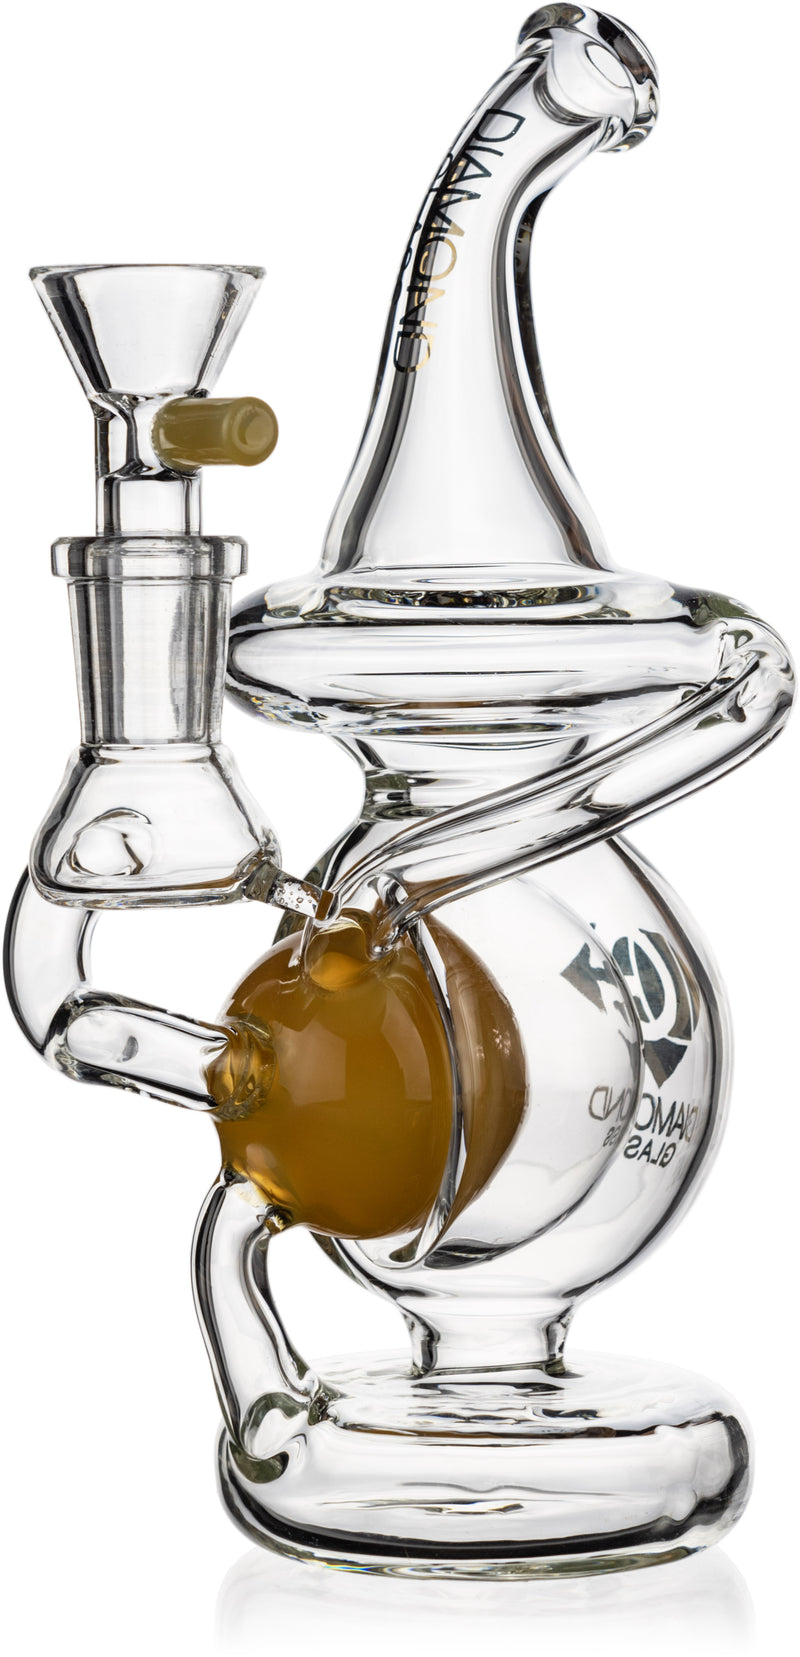 7" Floating Neutron Orb Recycler Rig, by Diamond Glass (free banger included) - Bat Kountry